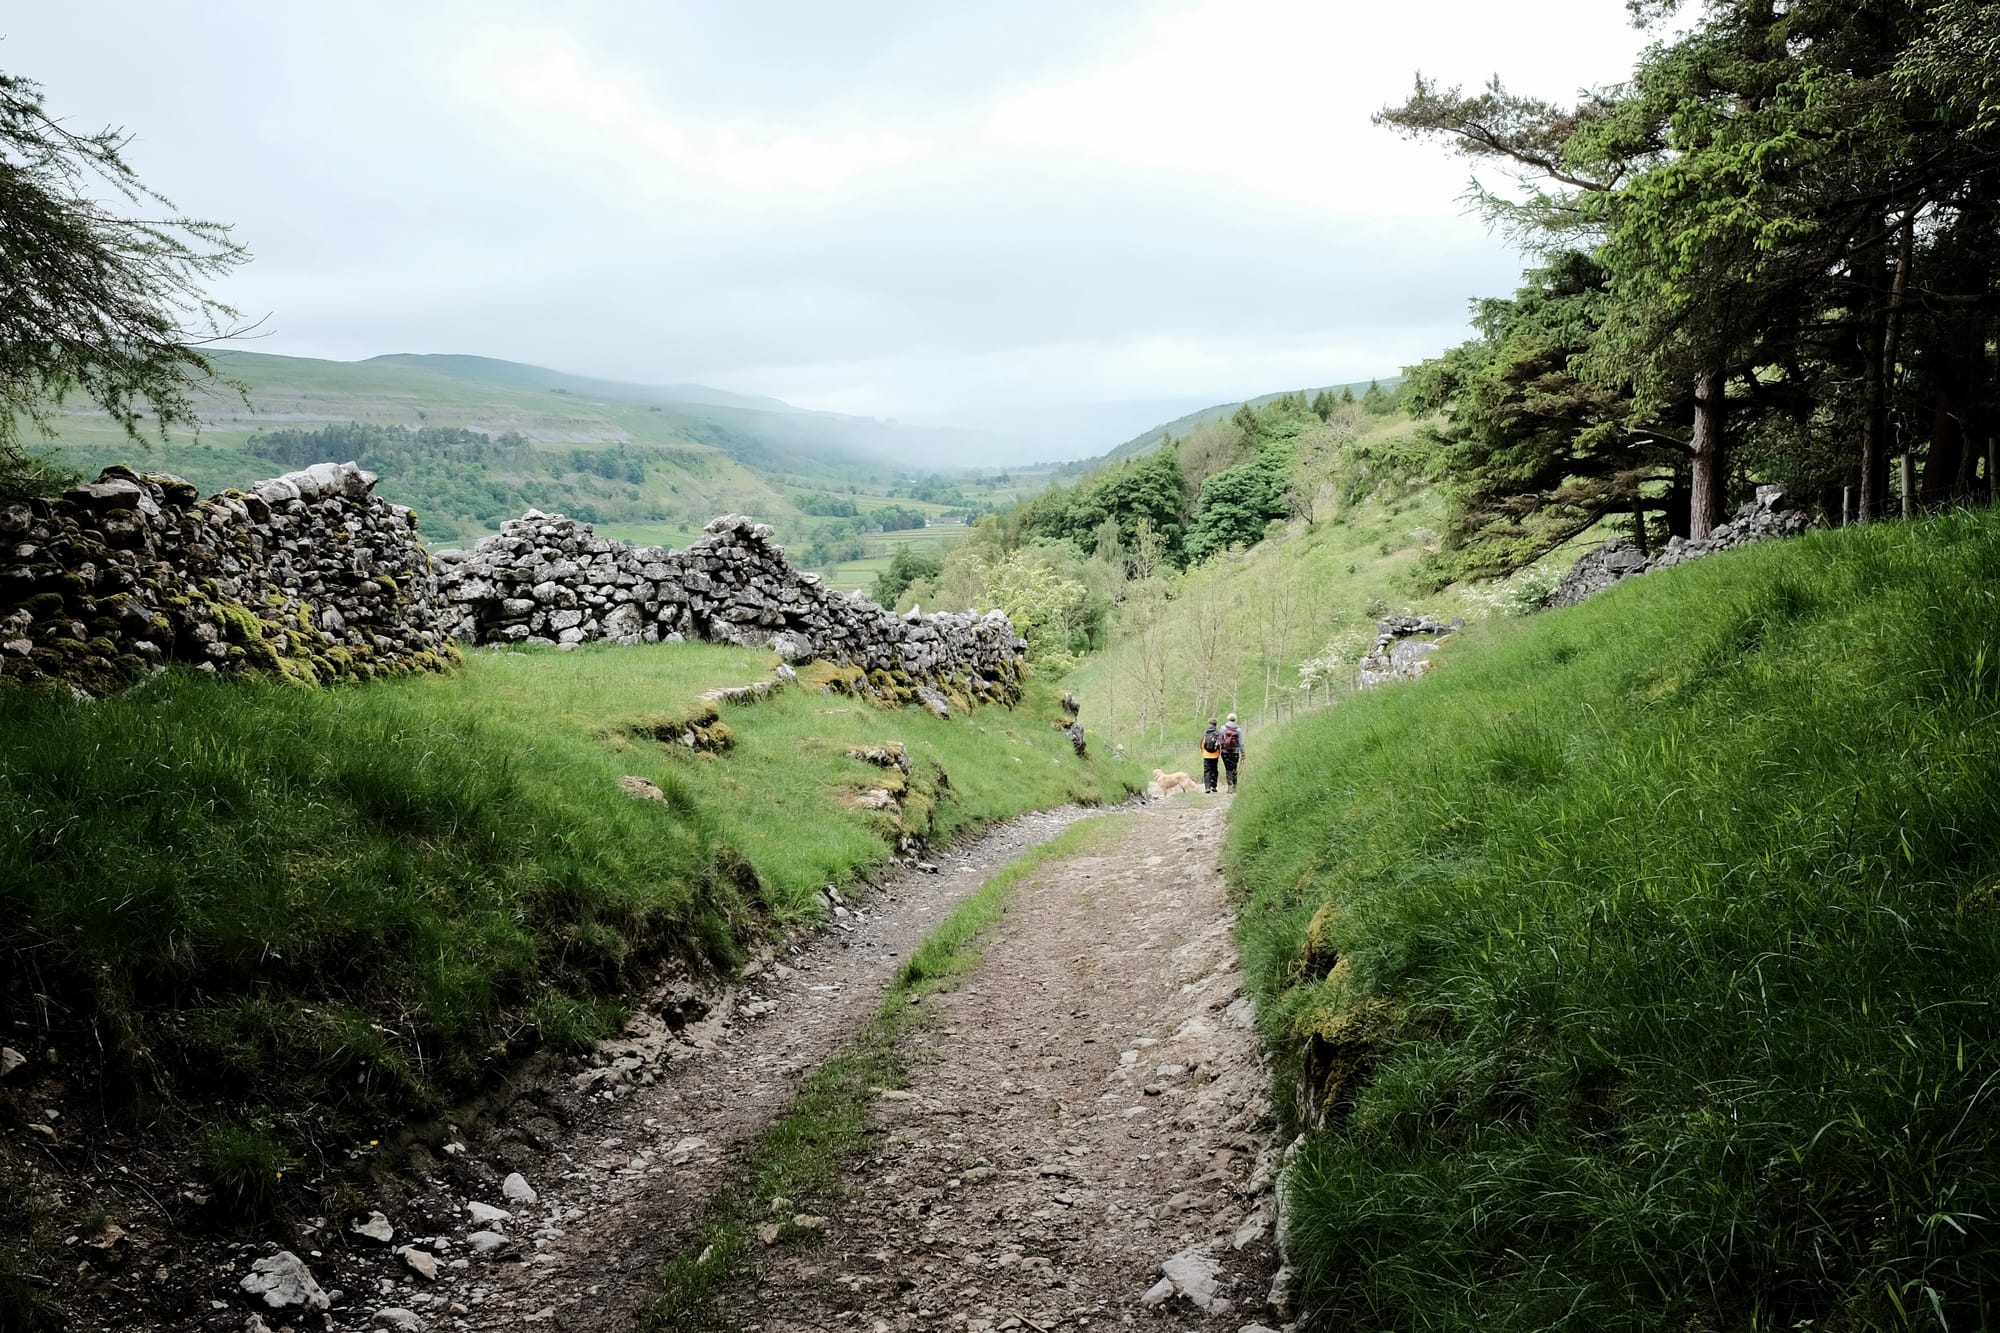 Two people and a yellow dog walk away in the distance down a stone track with high grass banks, hills in the distance.